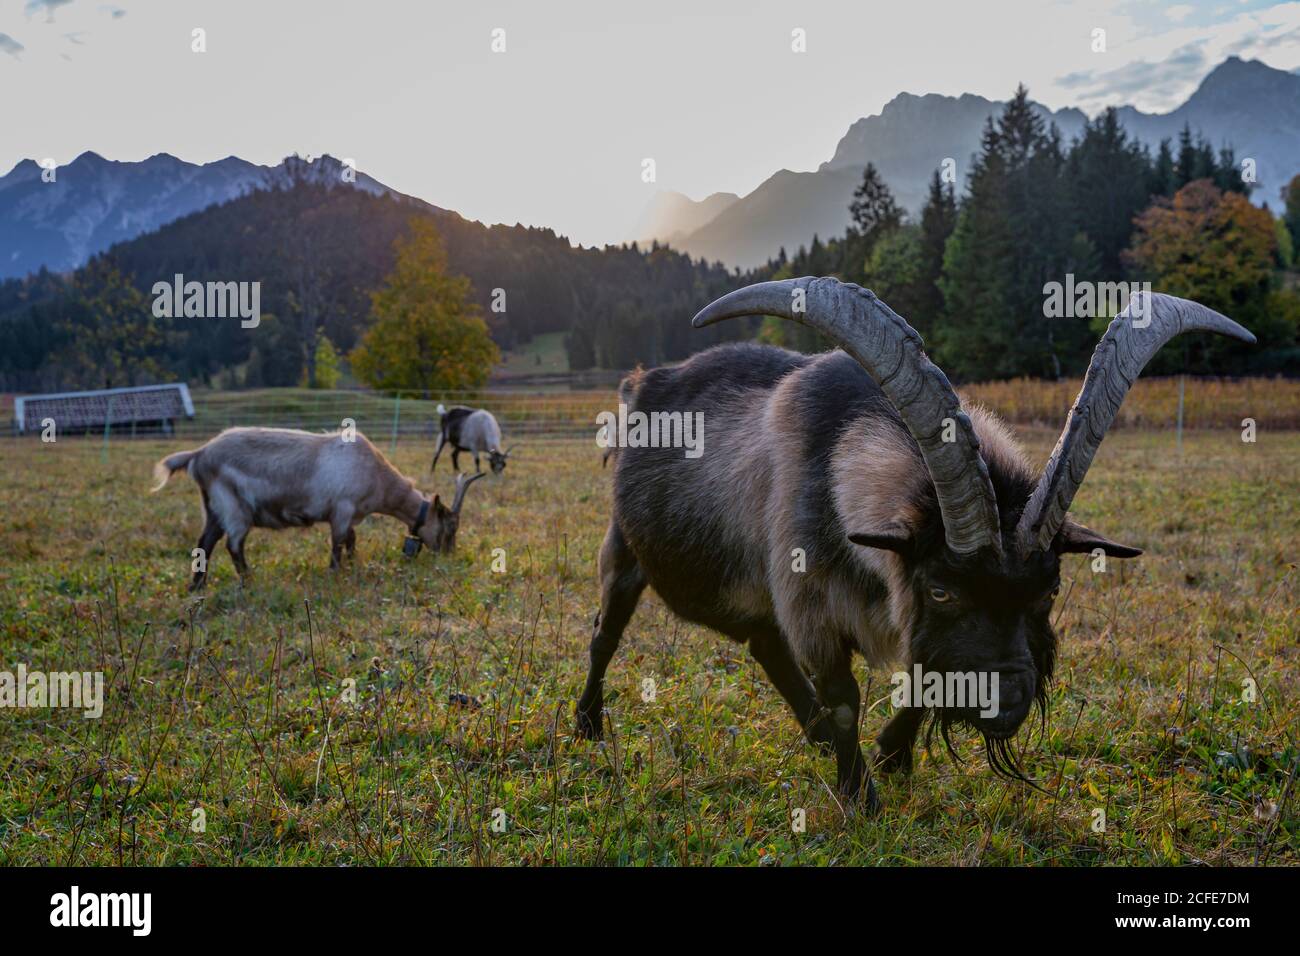 Three goats (a billy goat with distinctive horns) in Gerold at sunrise, in the background the Karwendel Mountains, Bauernstadel, Wiese, Krün, Stock Photo